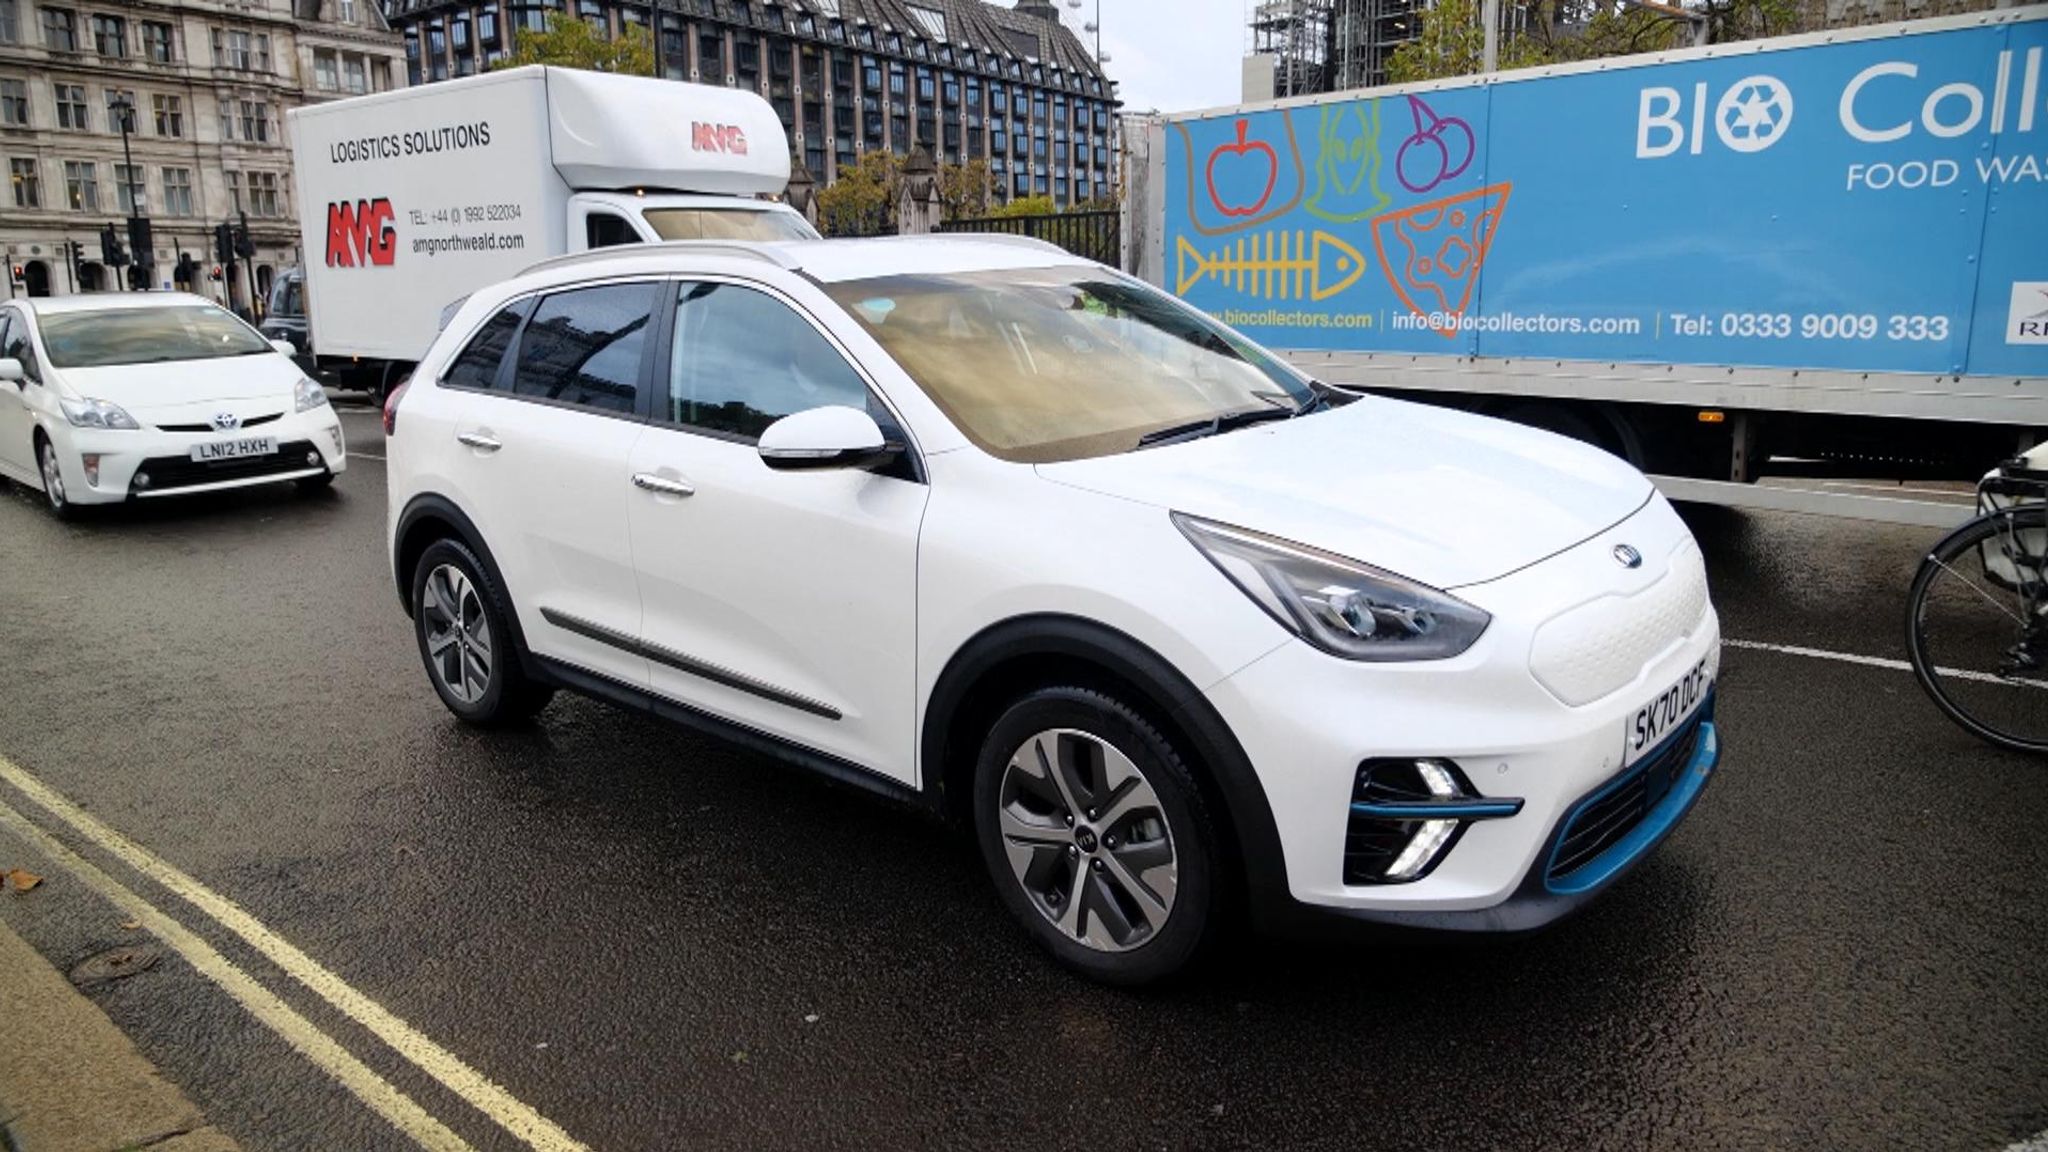 COP26 How easy is it to drive from London to Glasgow using an electric